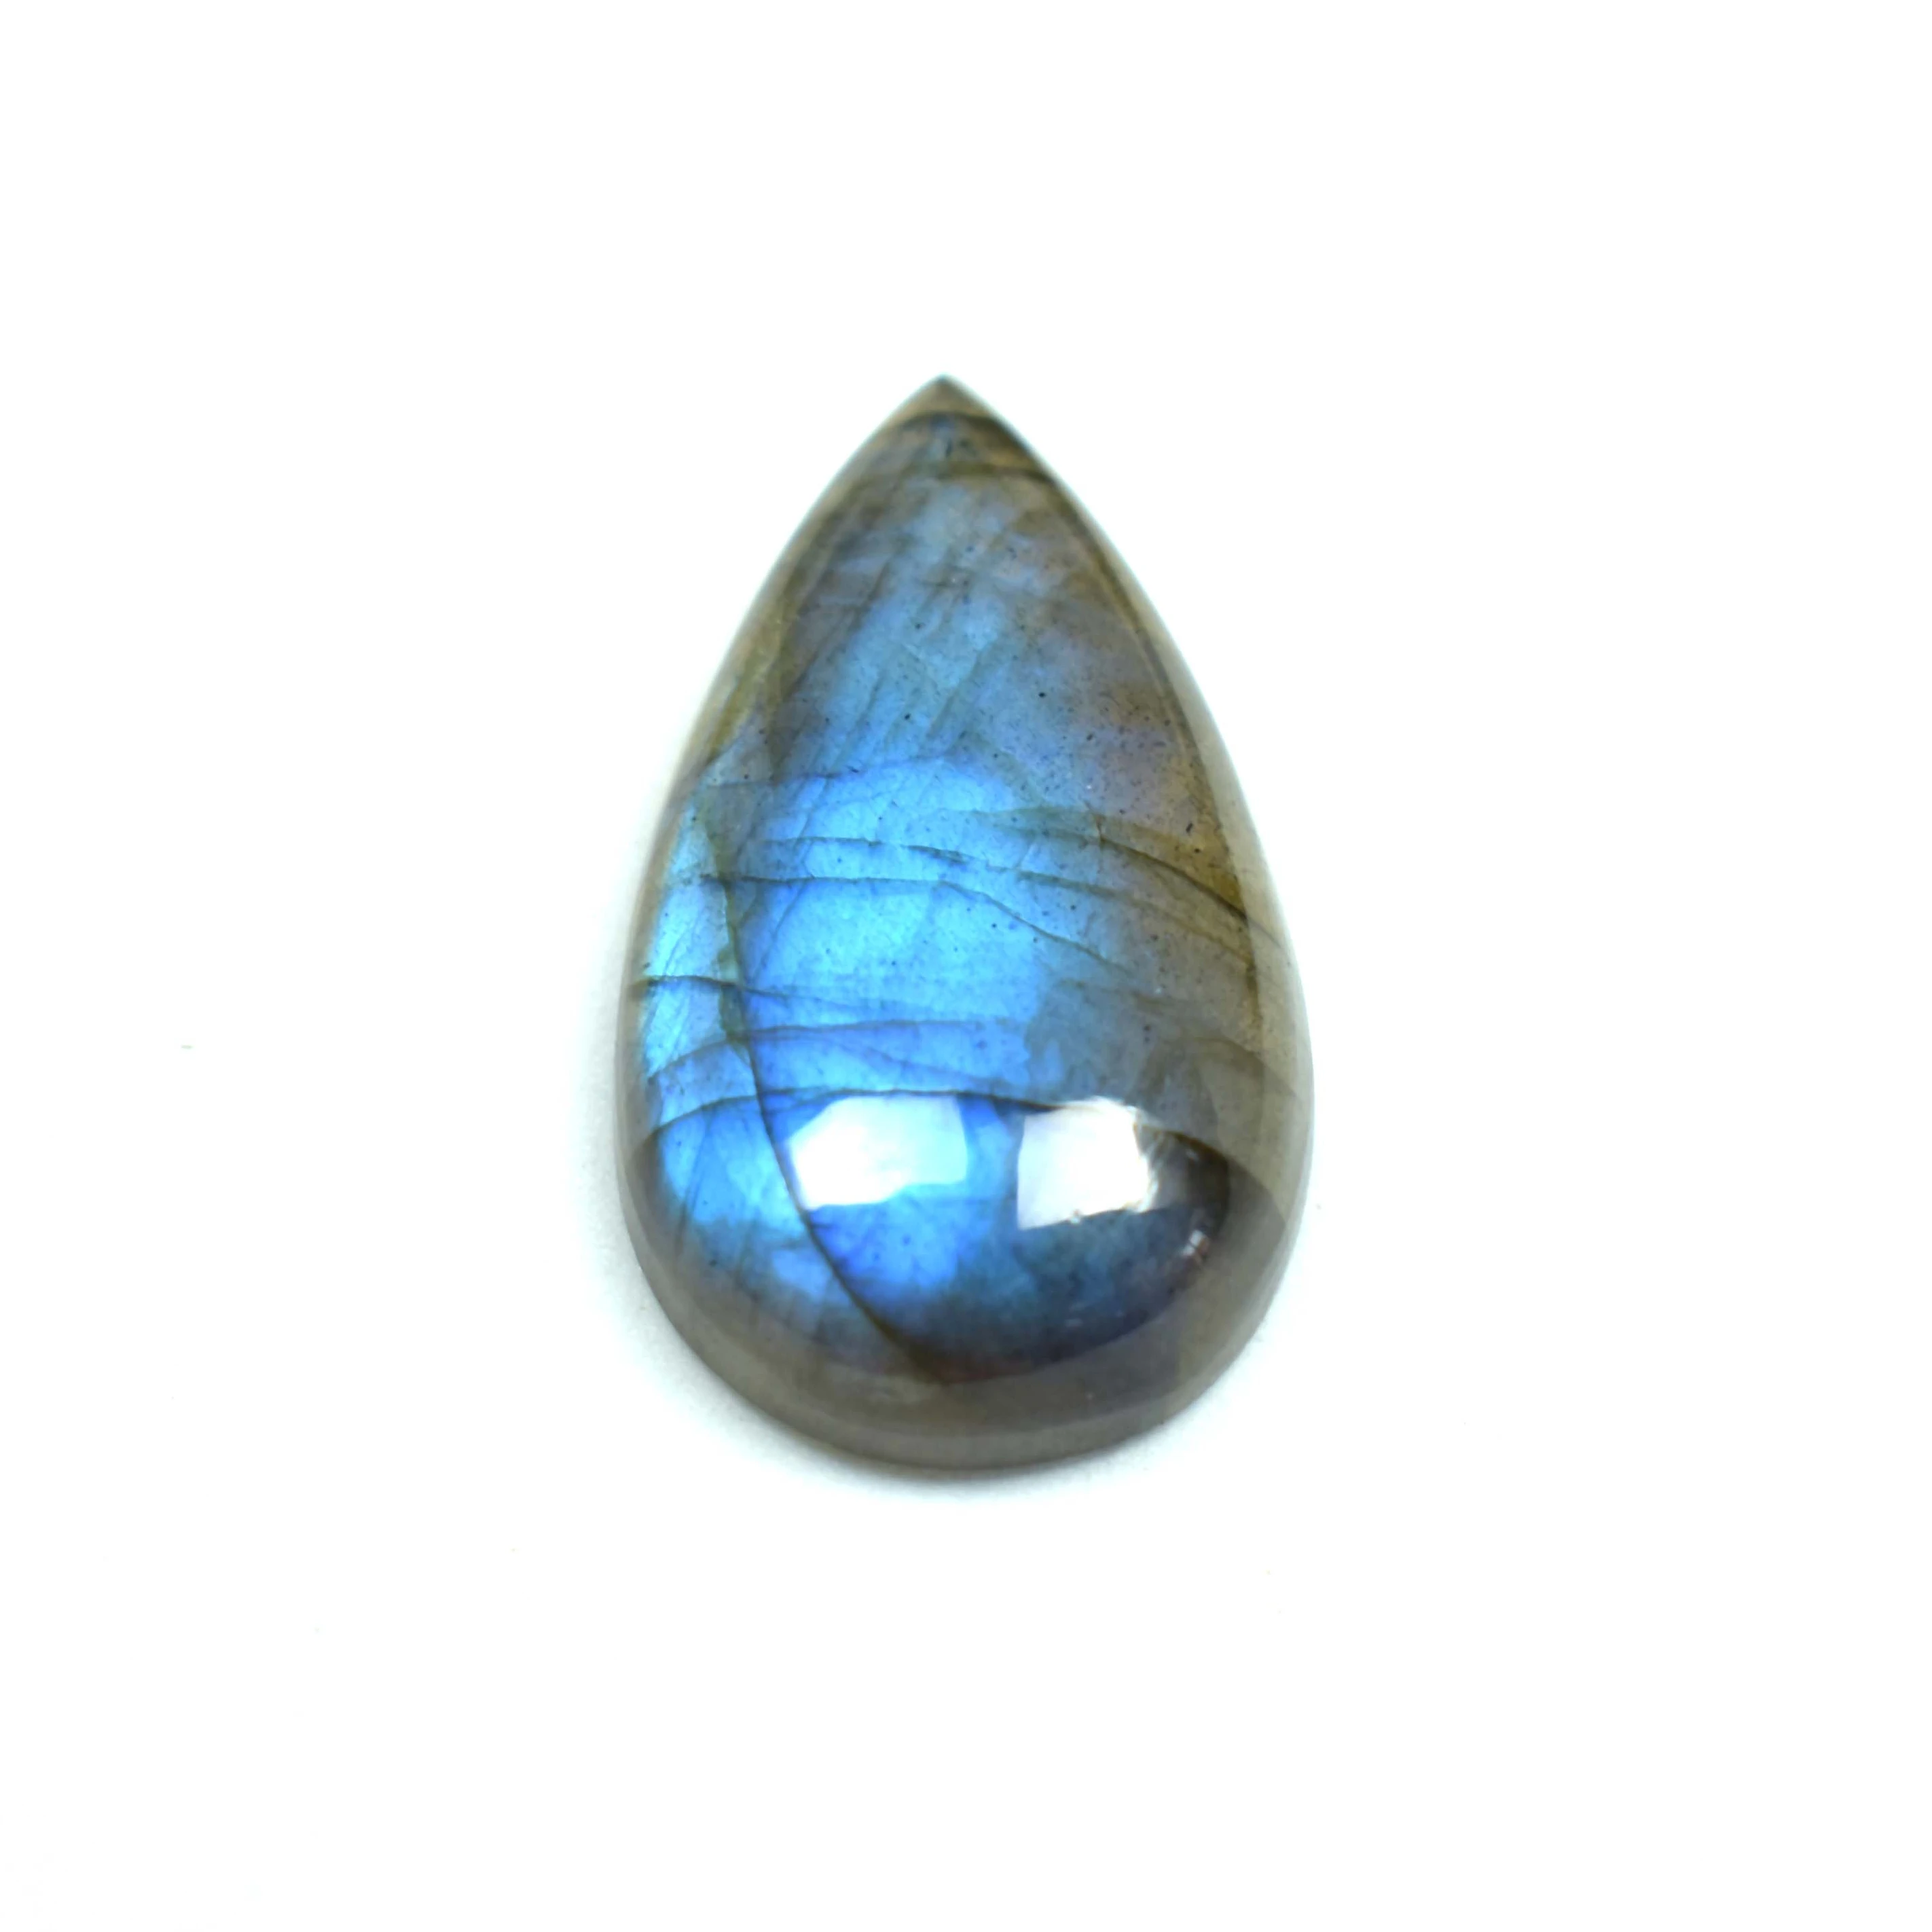 Supreme Top Grade Quality 100/% Natural Labradorite Pear Shape Cabochon Loose Gemstone For Making Jewelry 30 Ct 24X18X8 mm JMK-5996